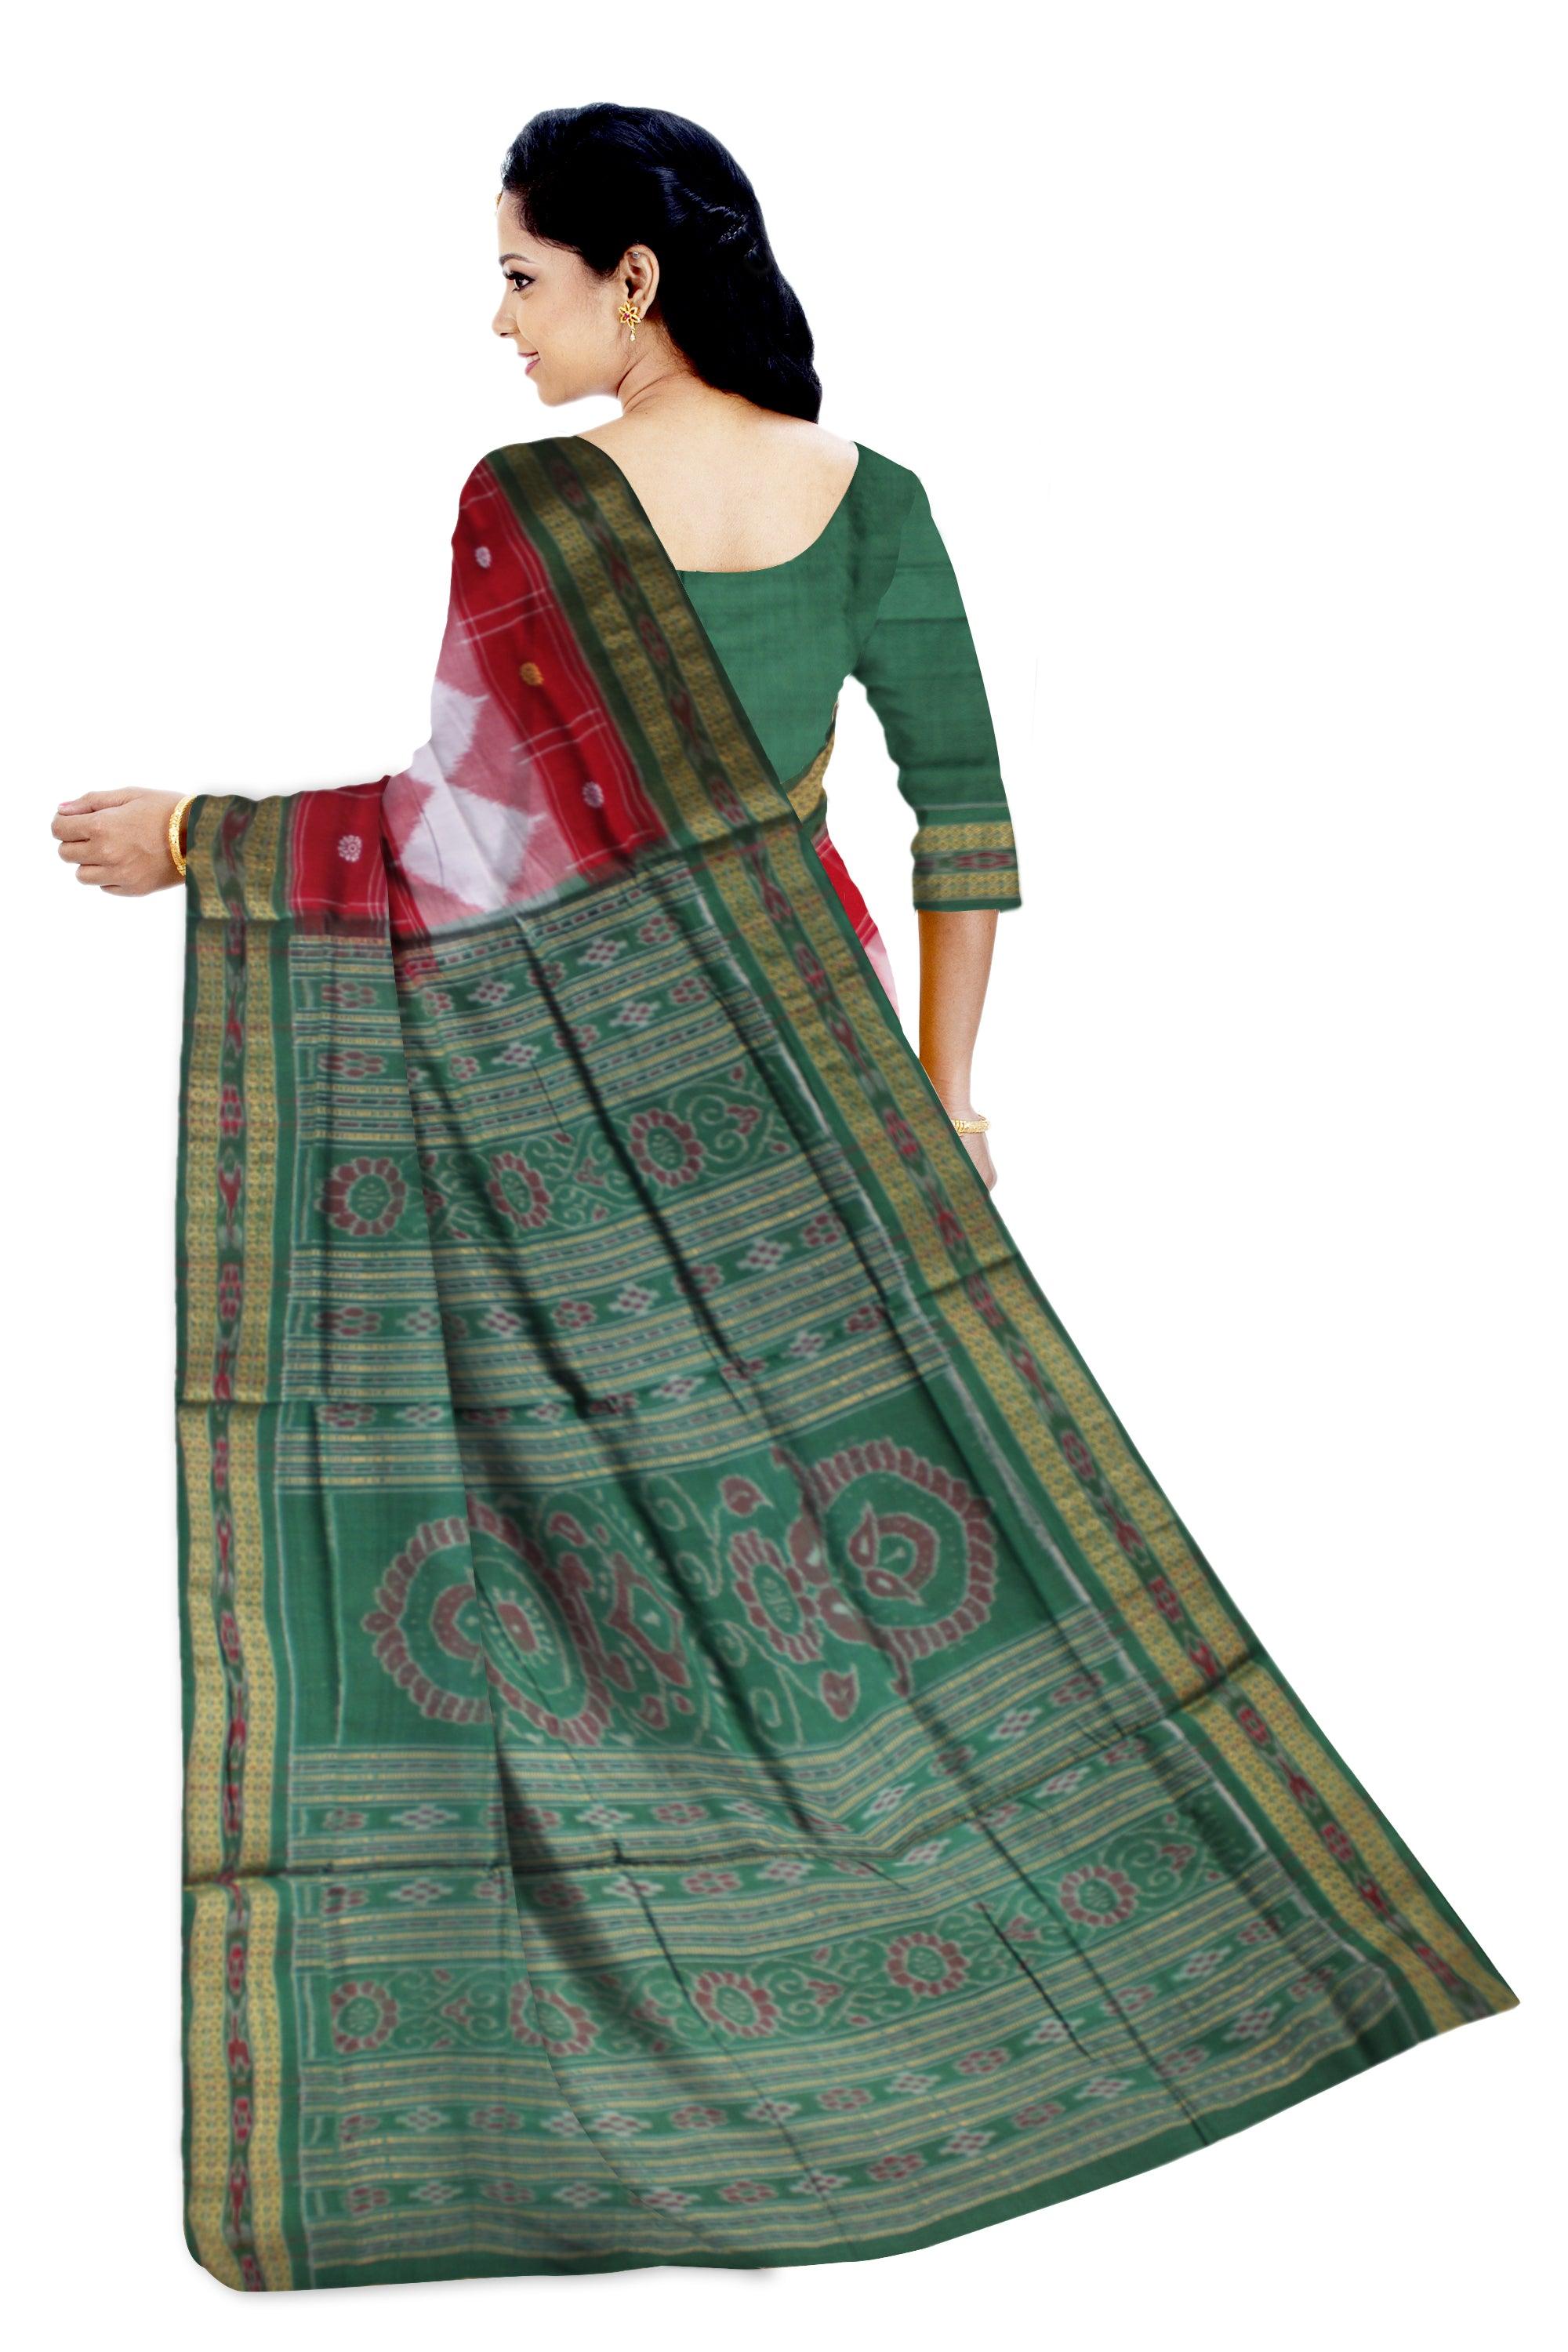 RED AND GREEN COLOR  LATEST DESIGN COTTON SAREE , WITH BLOUSE PIECE. - Koshali Arts & Crafts Enterprise